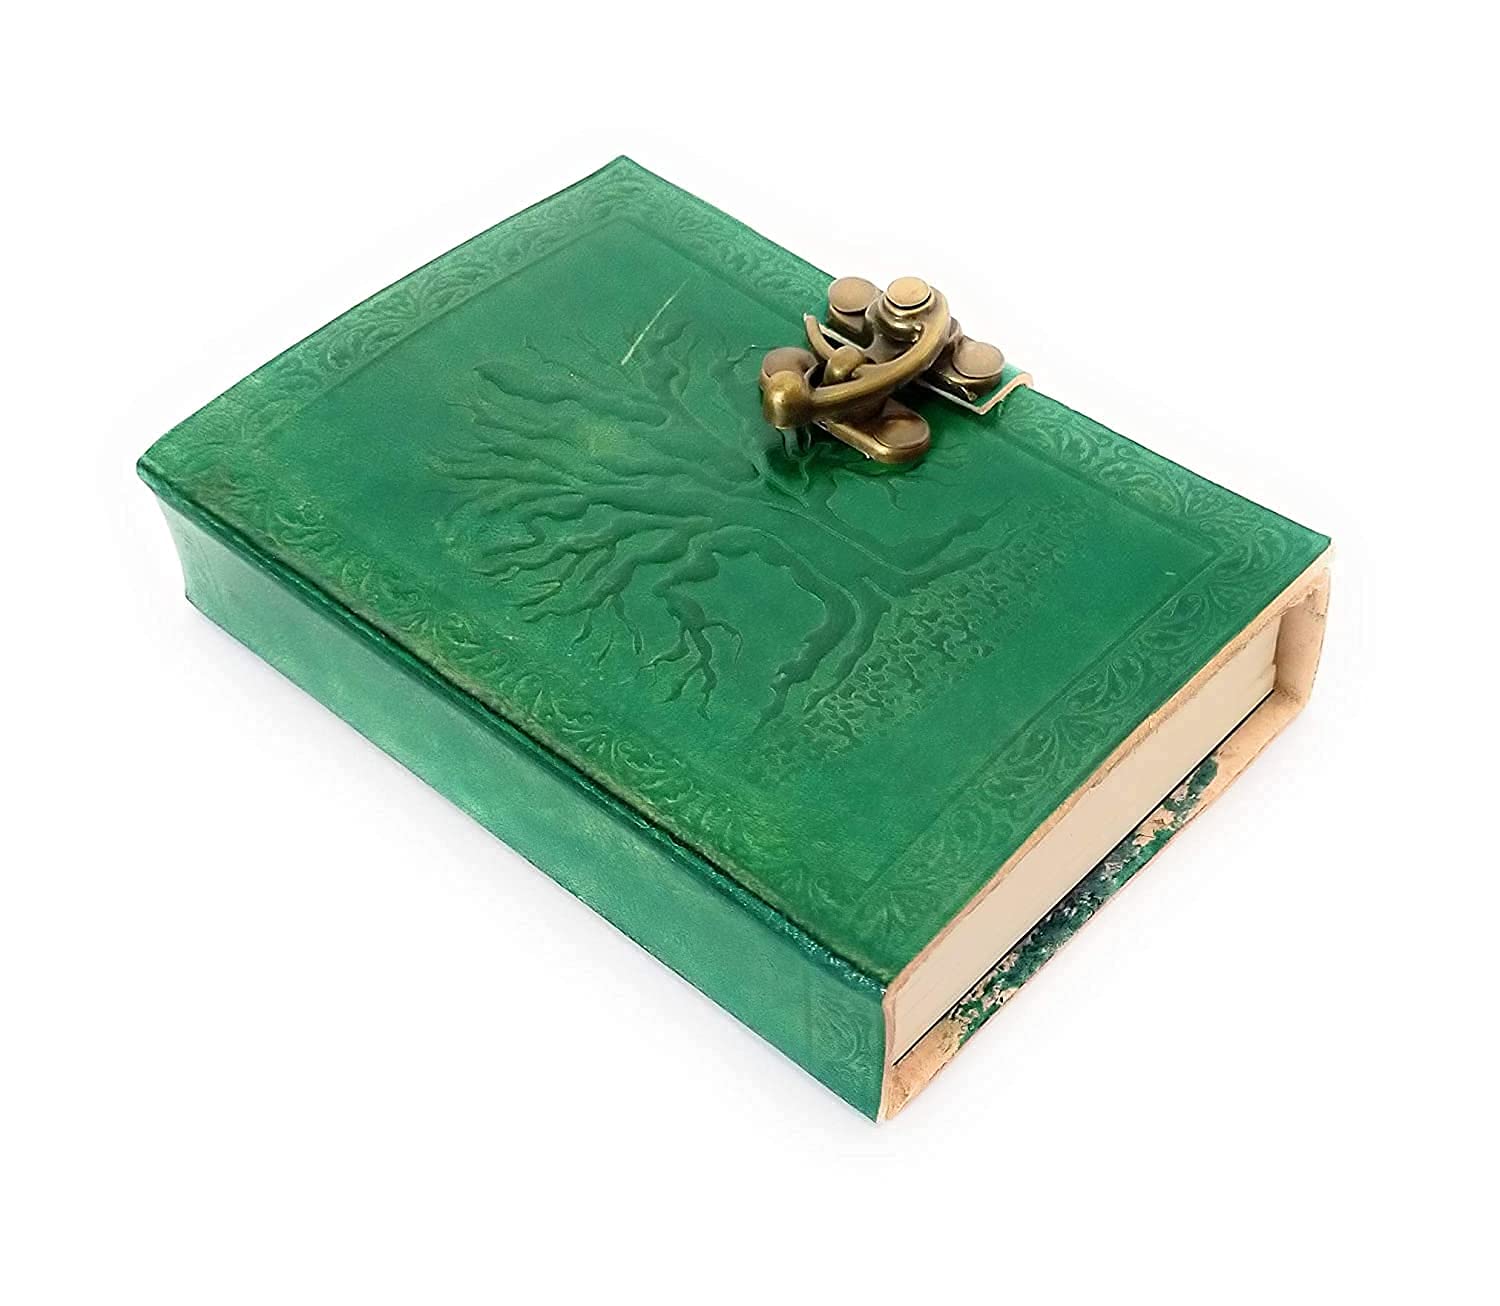 Handicrafts Leather Journals – Tree of Life Diary in Green Color Journal with Brass Lock